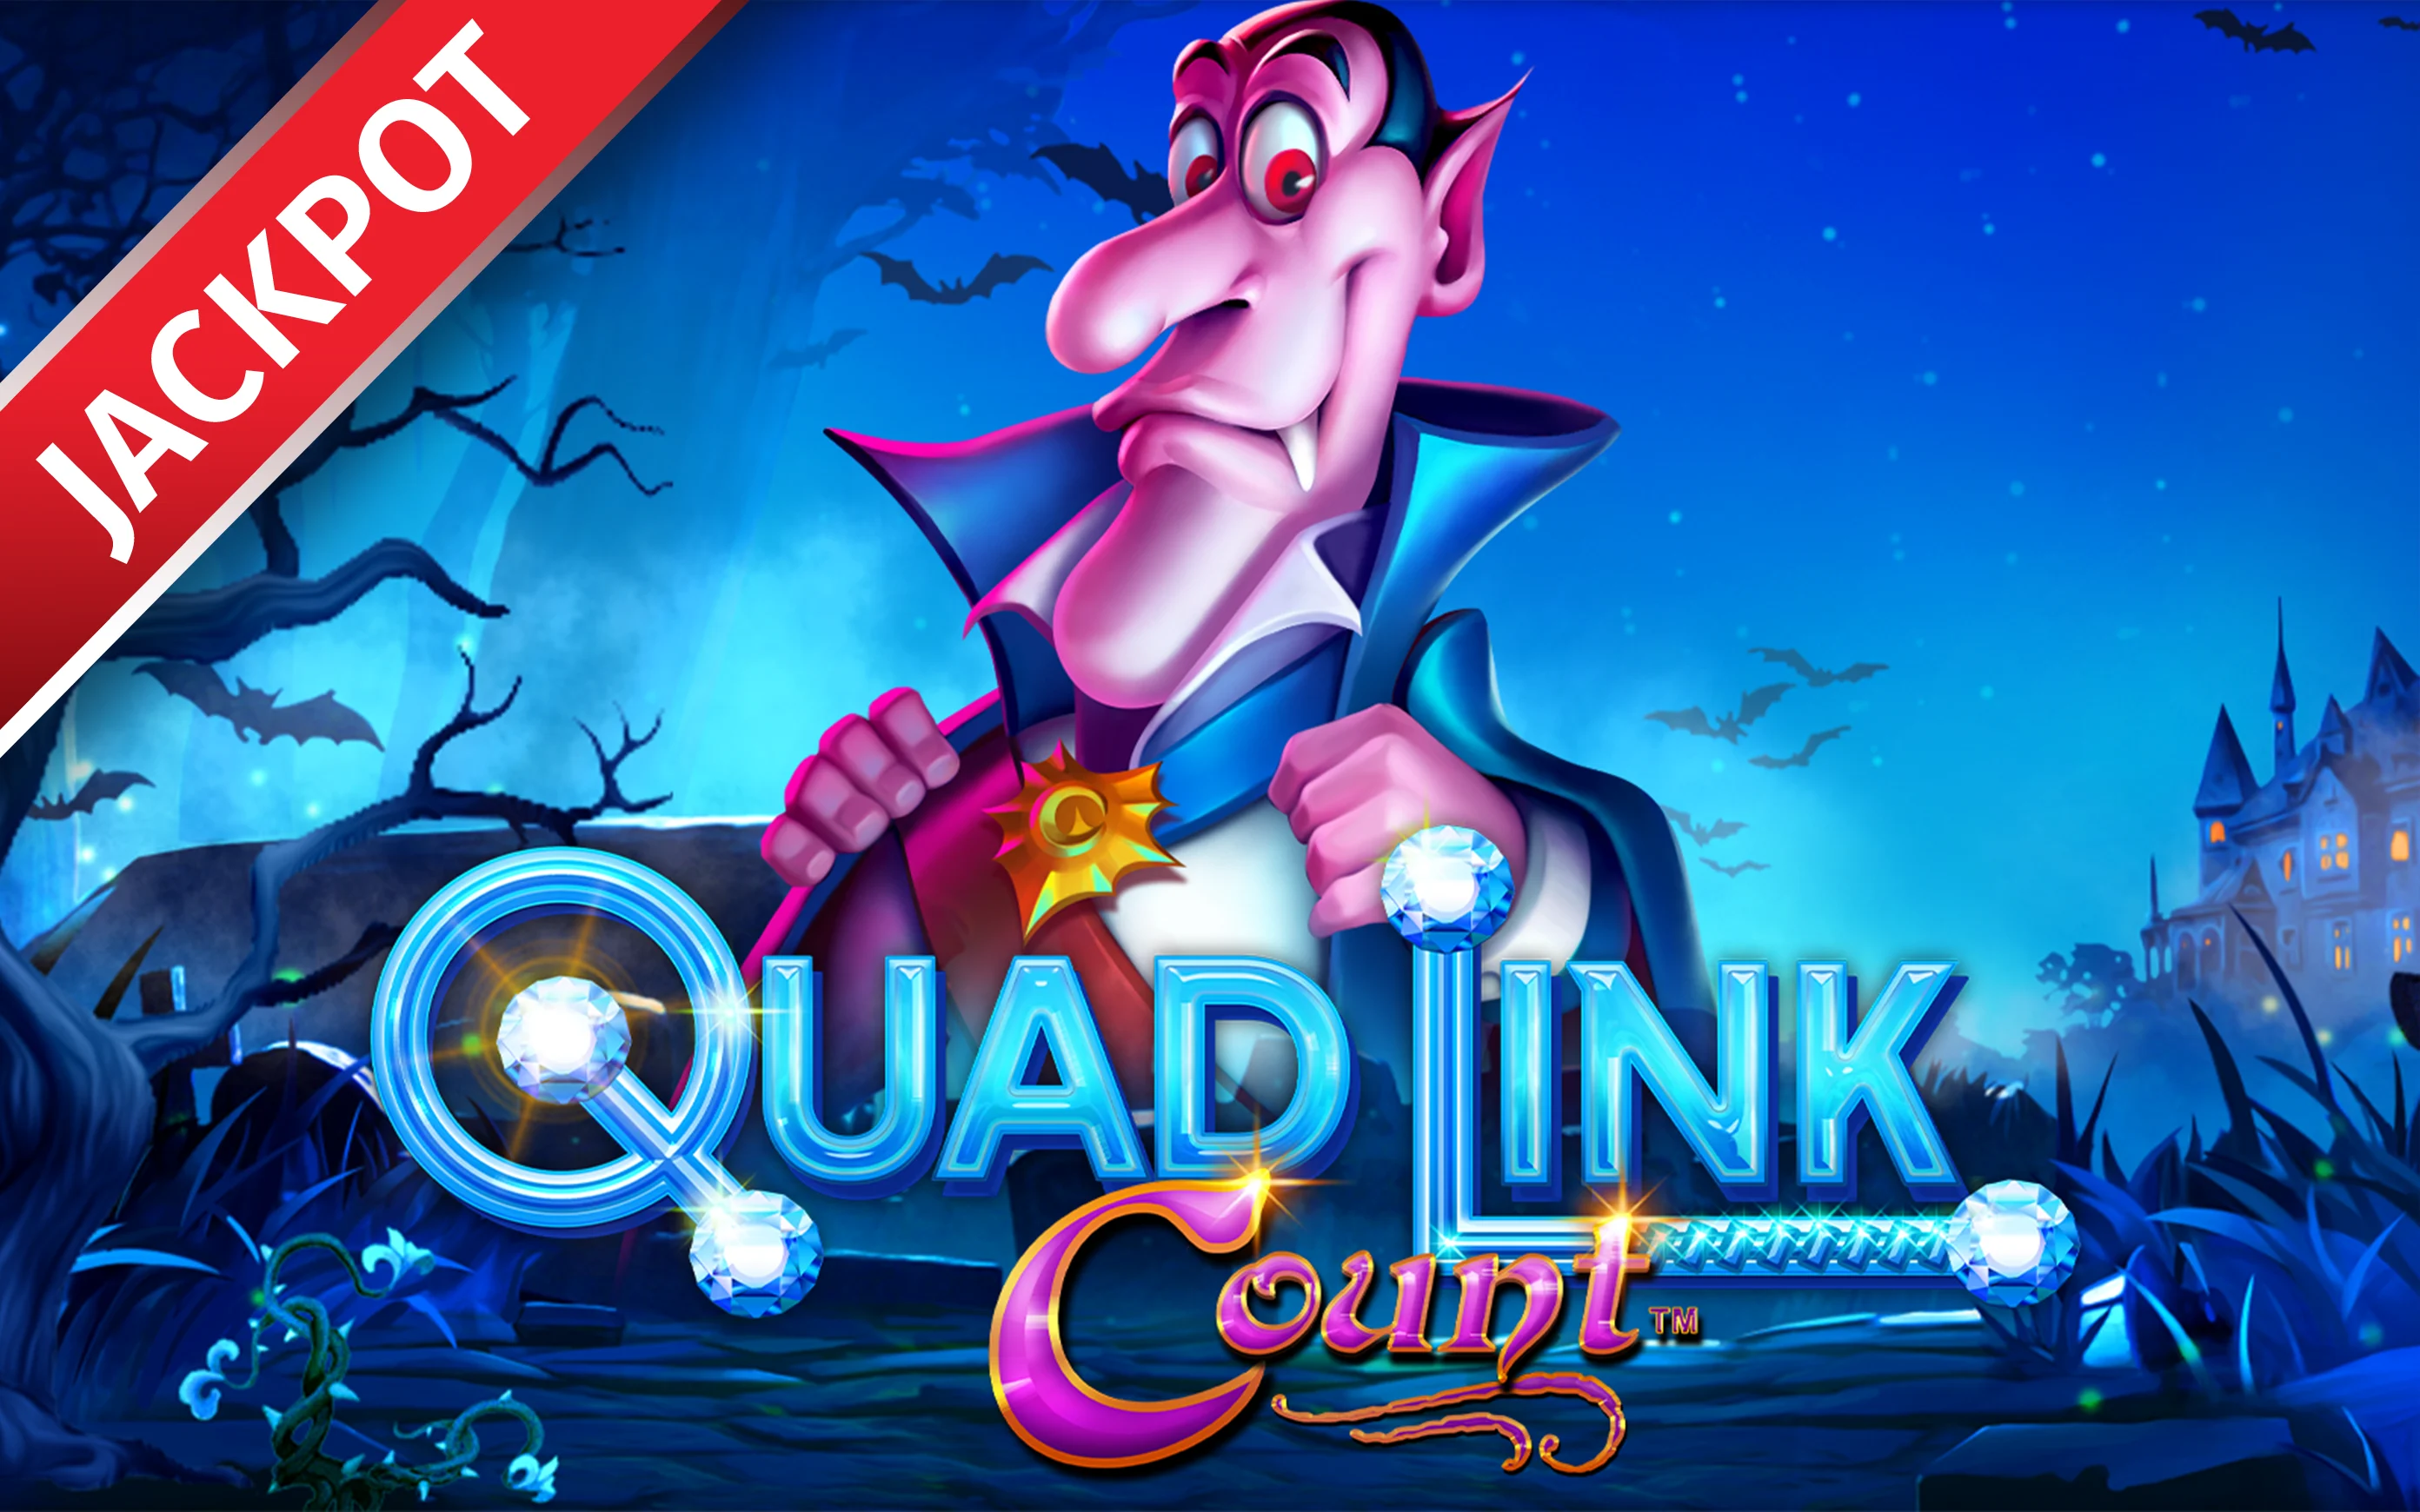 Play Quad Link: Count™ on Starcasino.be online casino